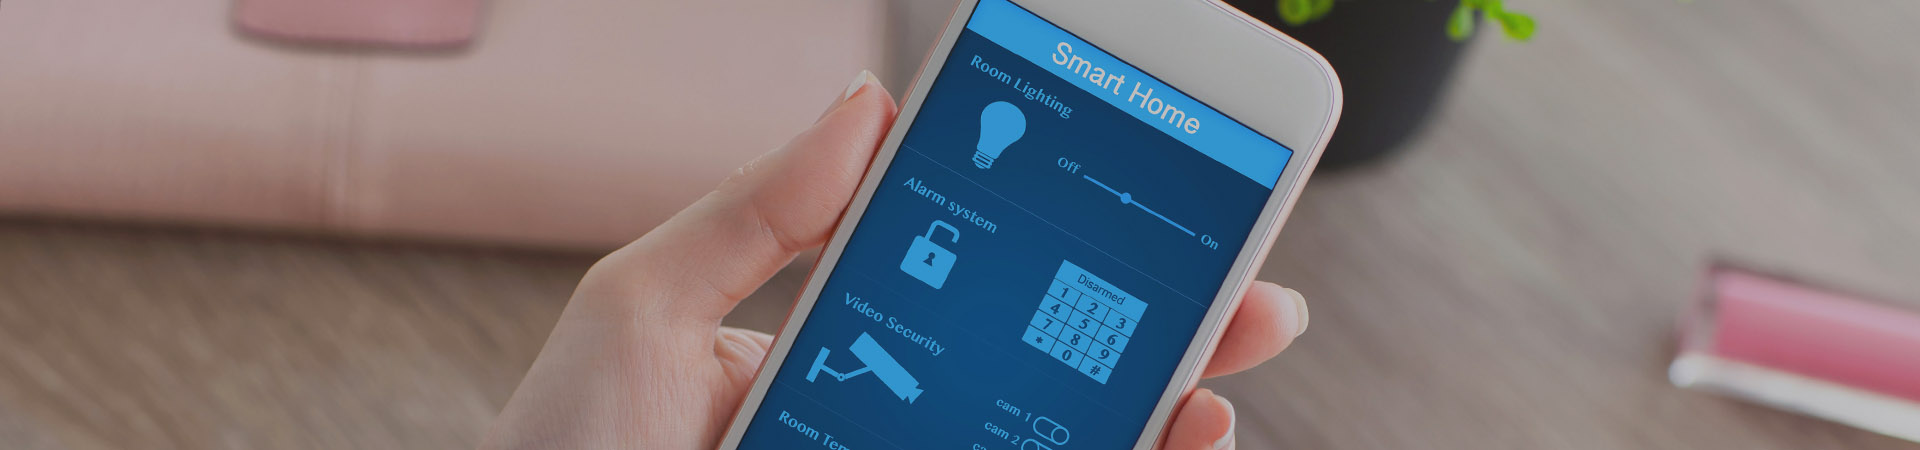 Development of a IoT Mobile App for Smart Home Control